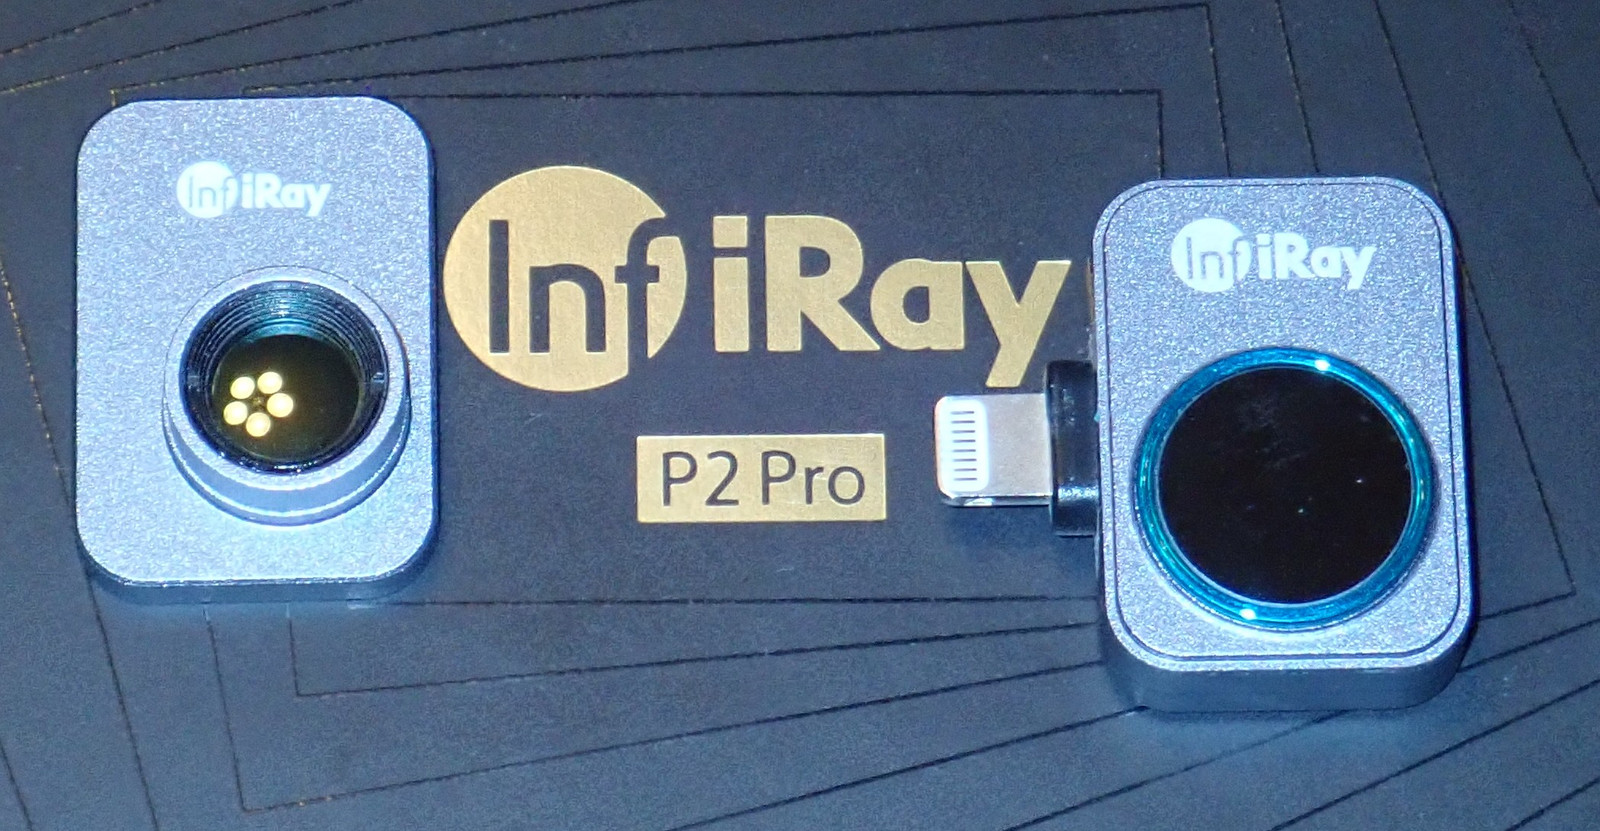 Thermal Camera Review - InfiRay P2 Pro after one month of use